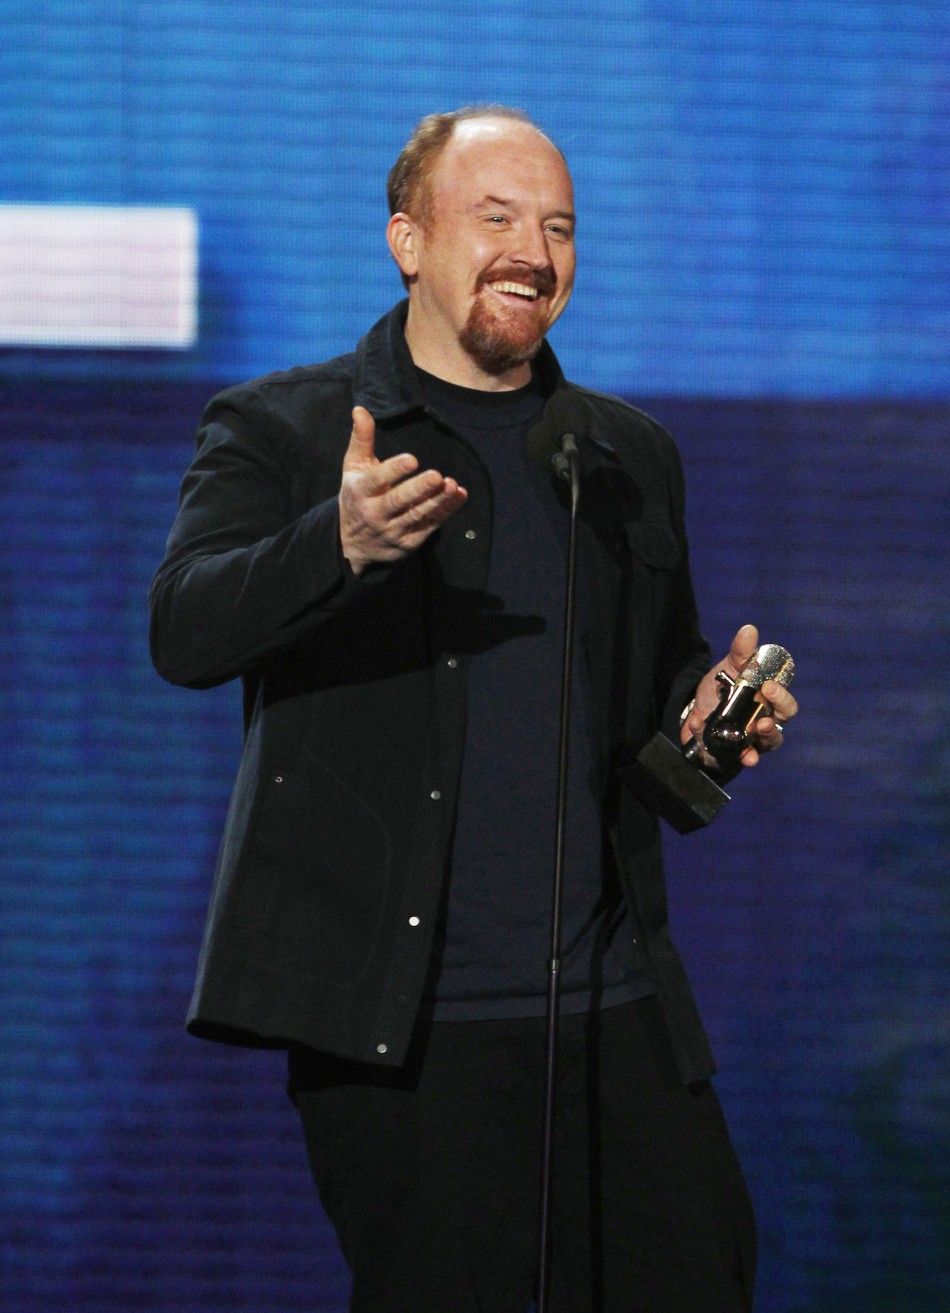 Comedian Louis CK accepts the award for Best Stand-Up Special at quotThe Comedy Awardsquot in New York City